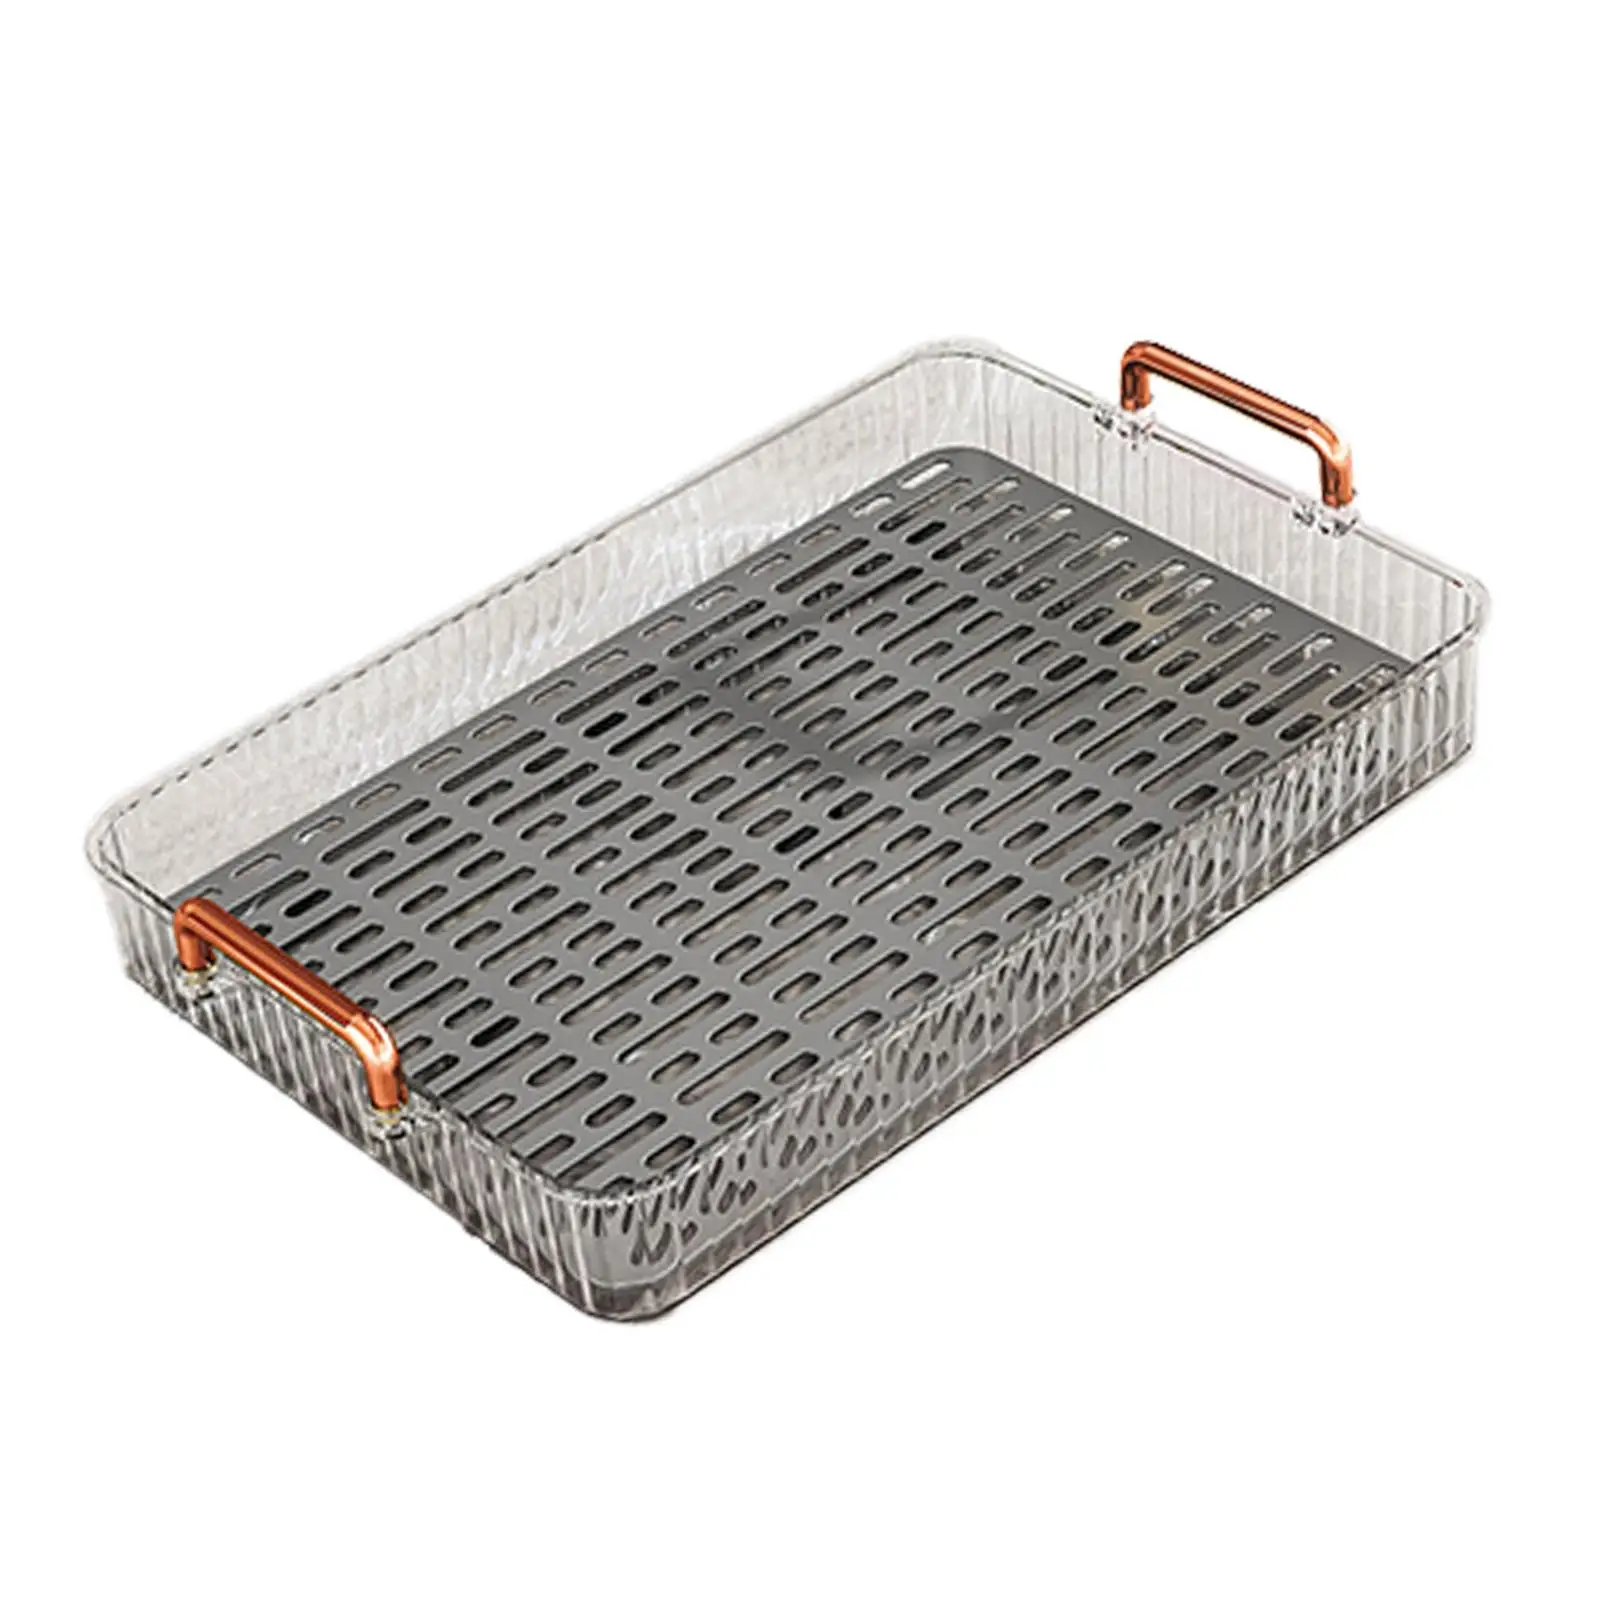 Serving Tray Drainer Tray Tableware Cosmetic Perfume Makeup Display Jewelry Tray for Dressing Room Party Home Table Centerpiece